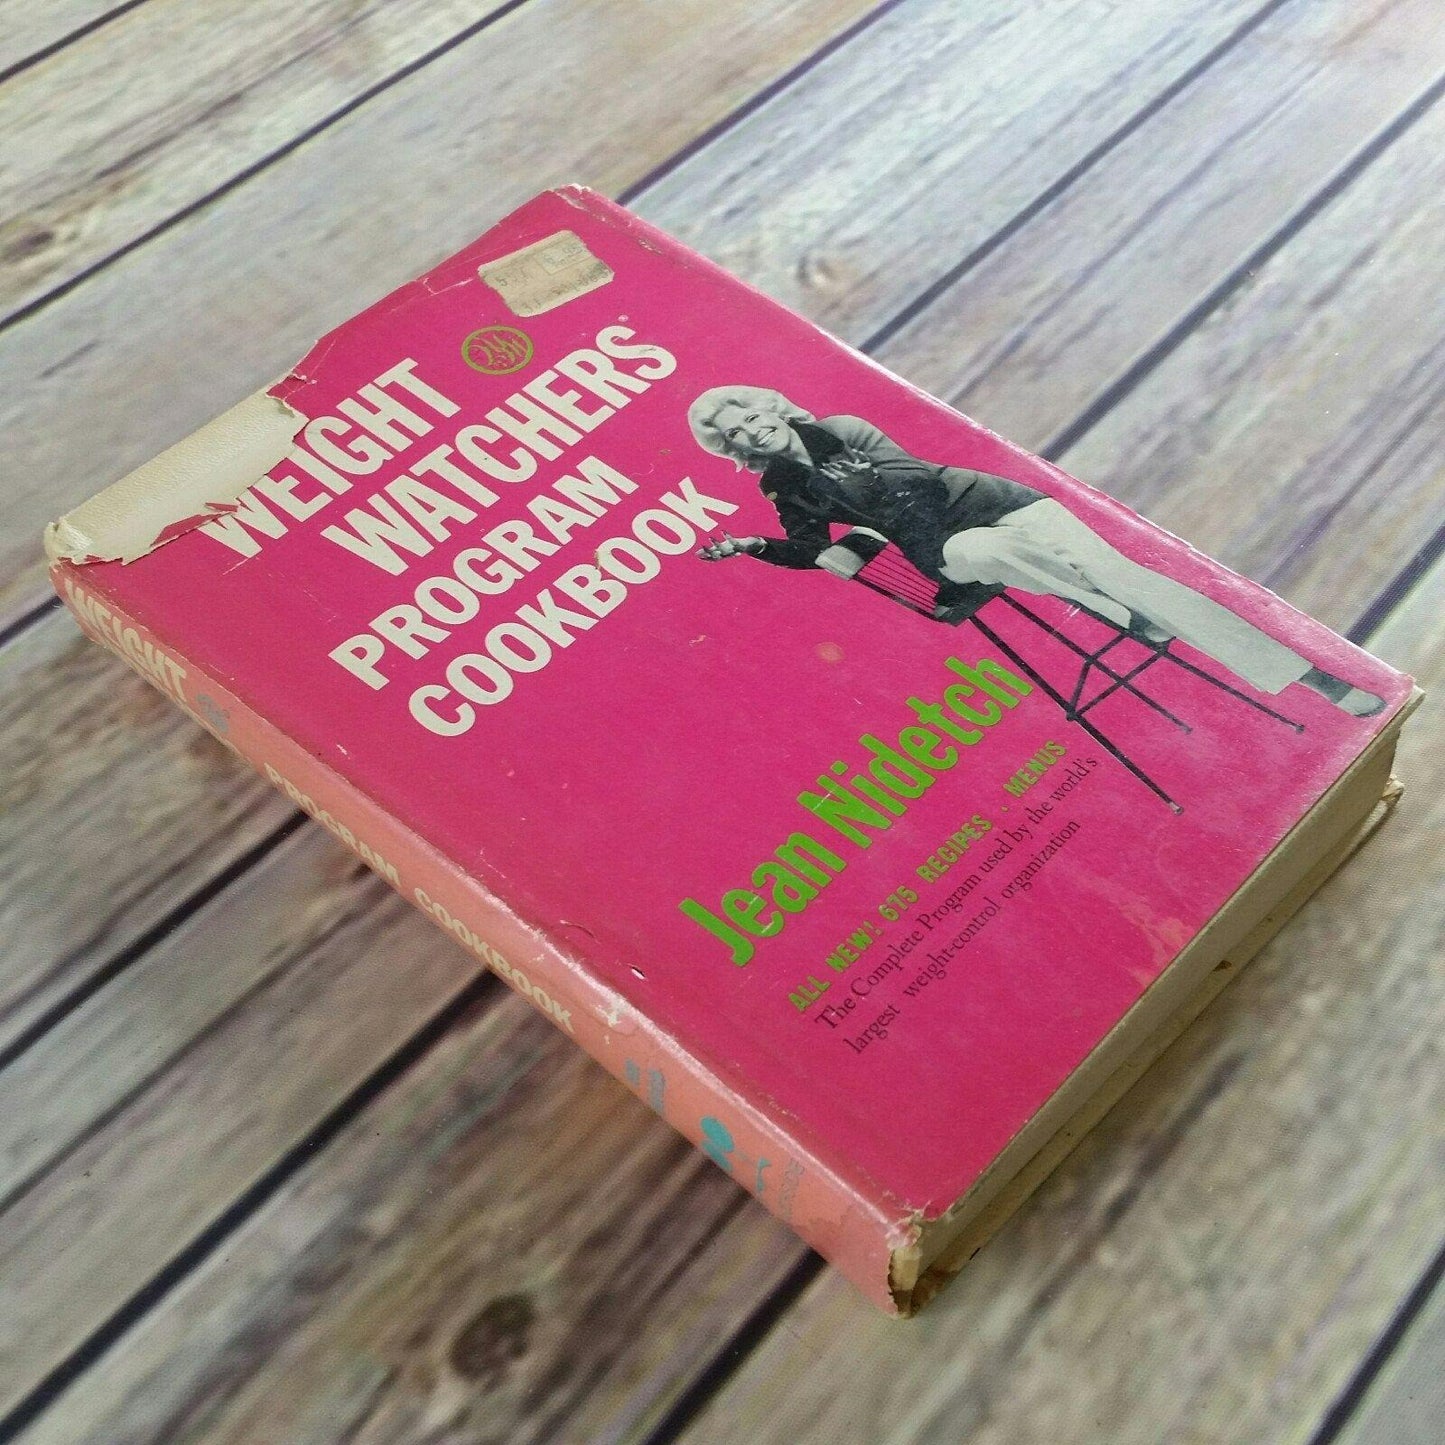 Vintage Cookbook Weight Watchers Program 1973 Pink Hardcover With Dust Jacket Jean Nidetch